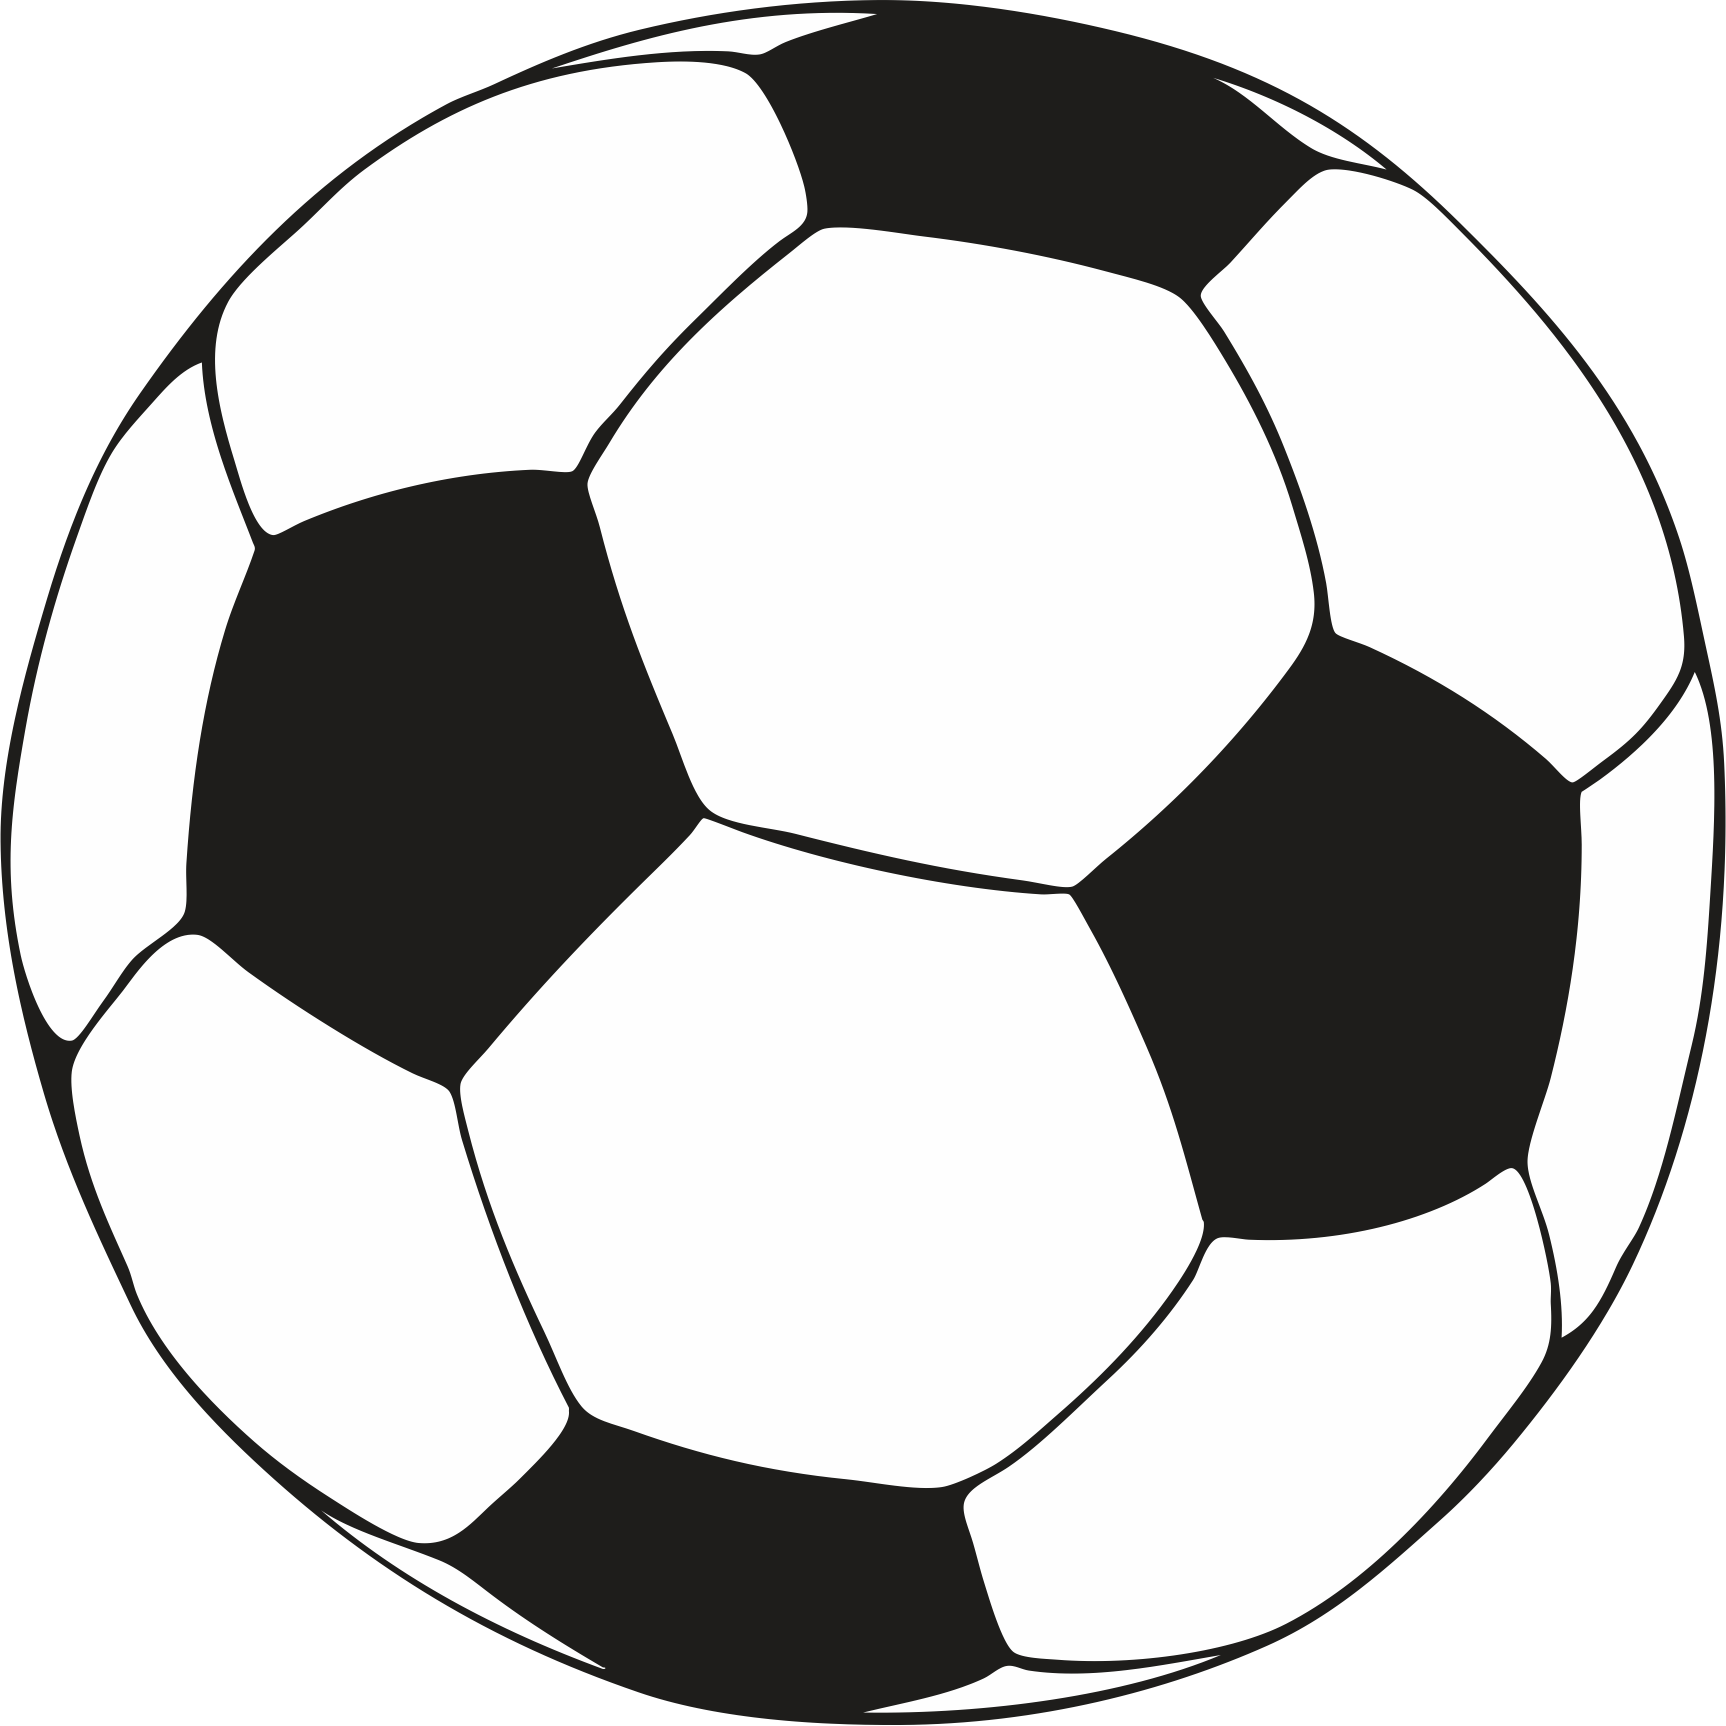 Coloring pages of soccer ball clipart